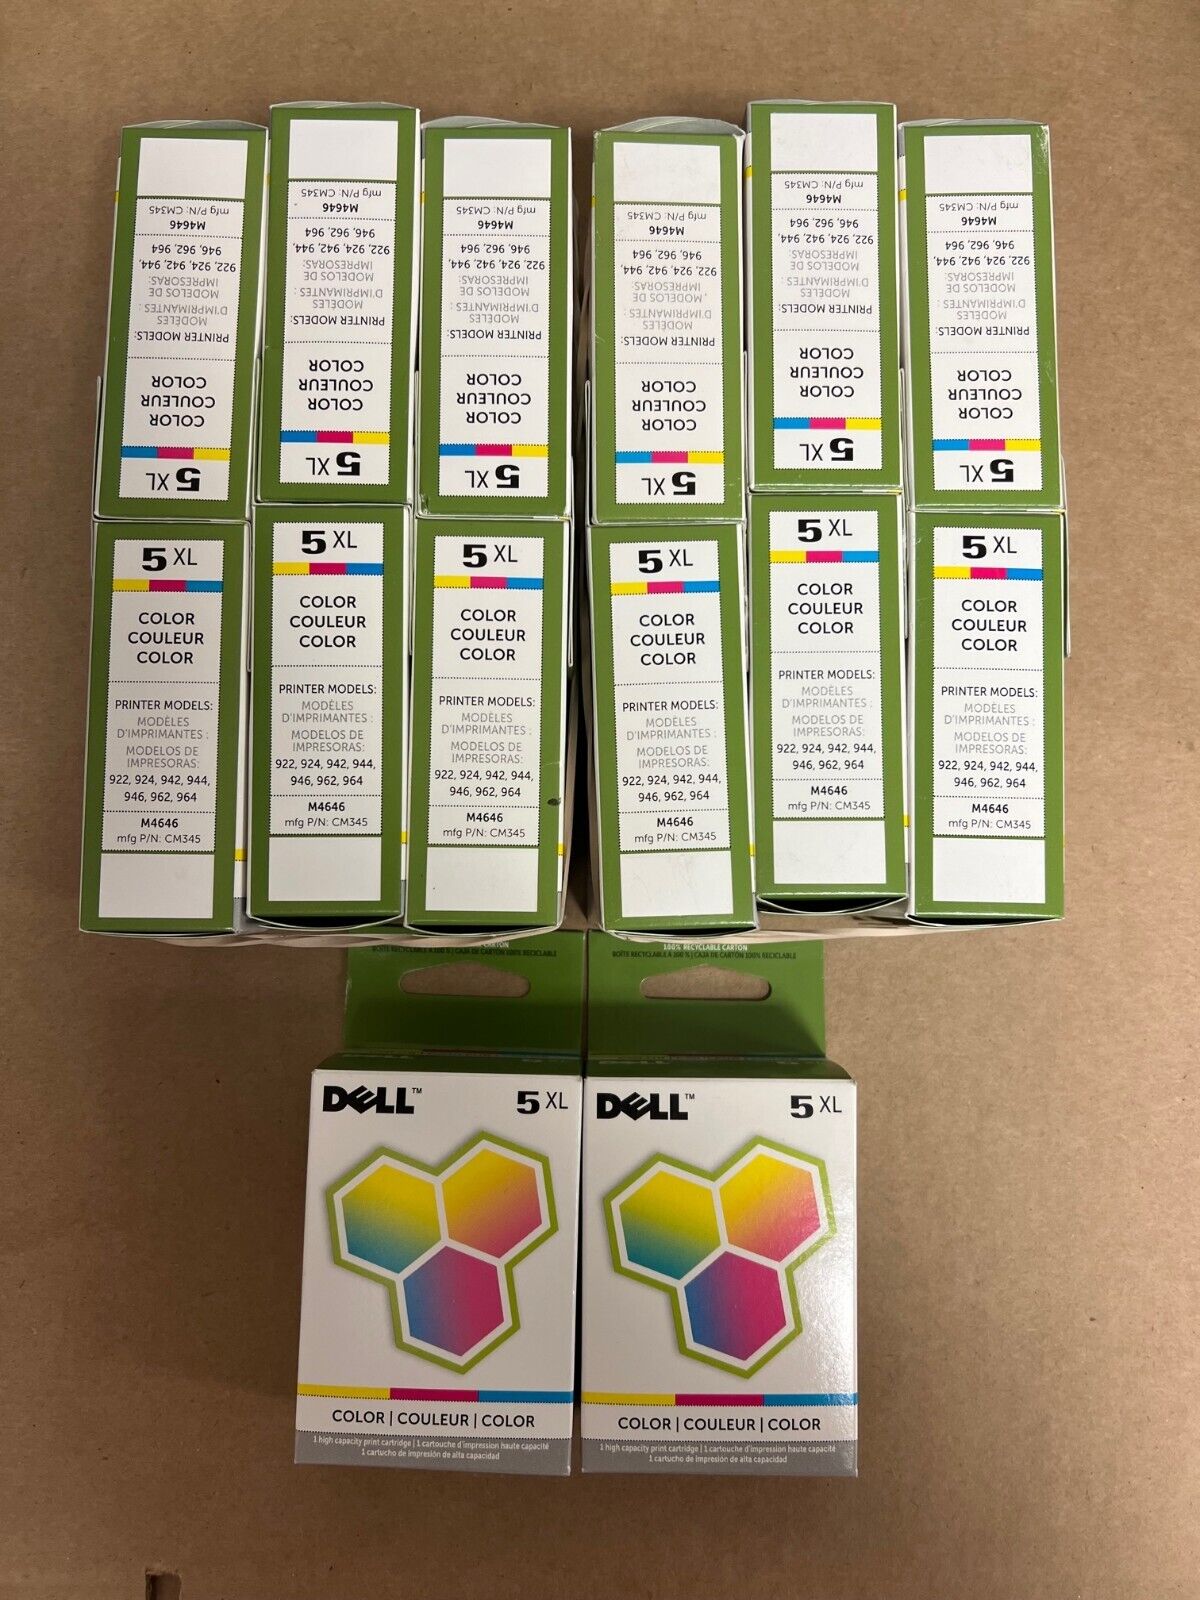 (14) NEW Factory Sealed Genuine Dell Series 5XL Color M4646 Print Cartridges